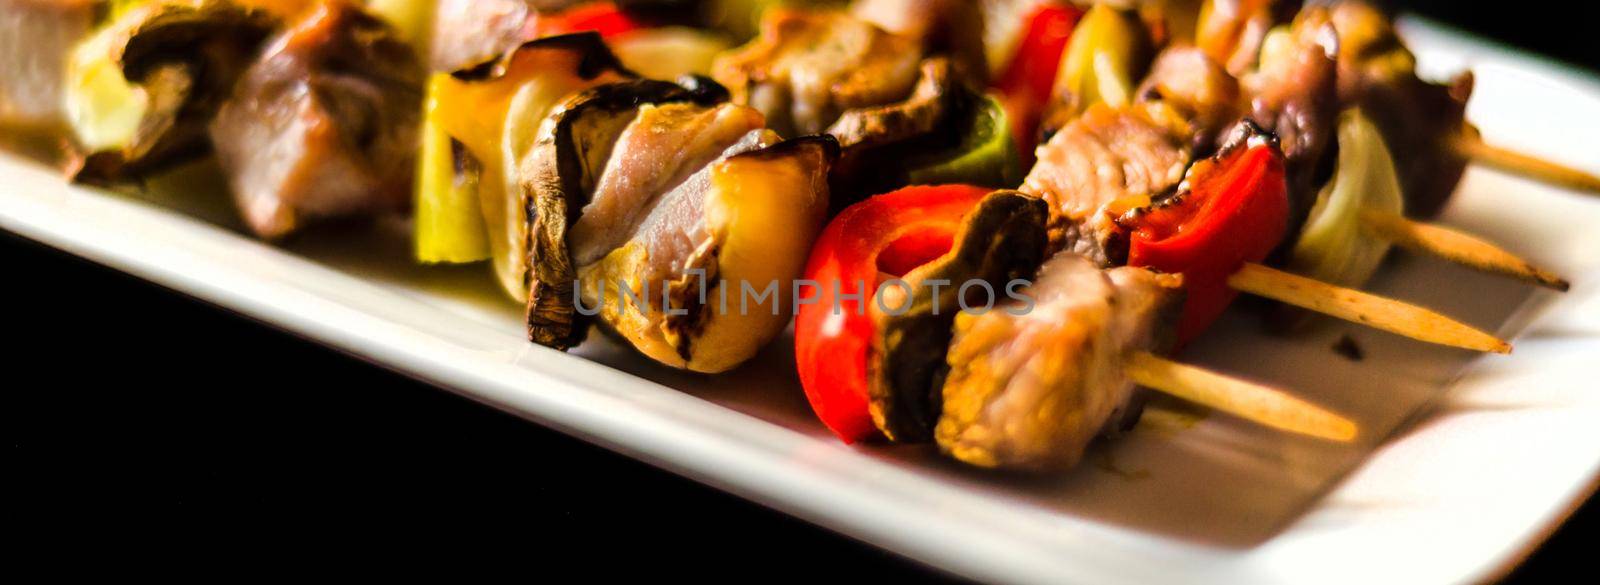 grilled skewers of meat and vegetables on a wooden board by Q77photo